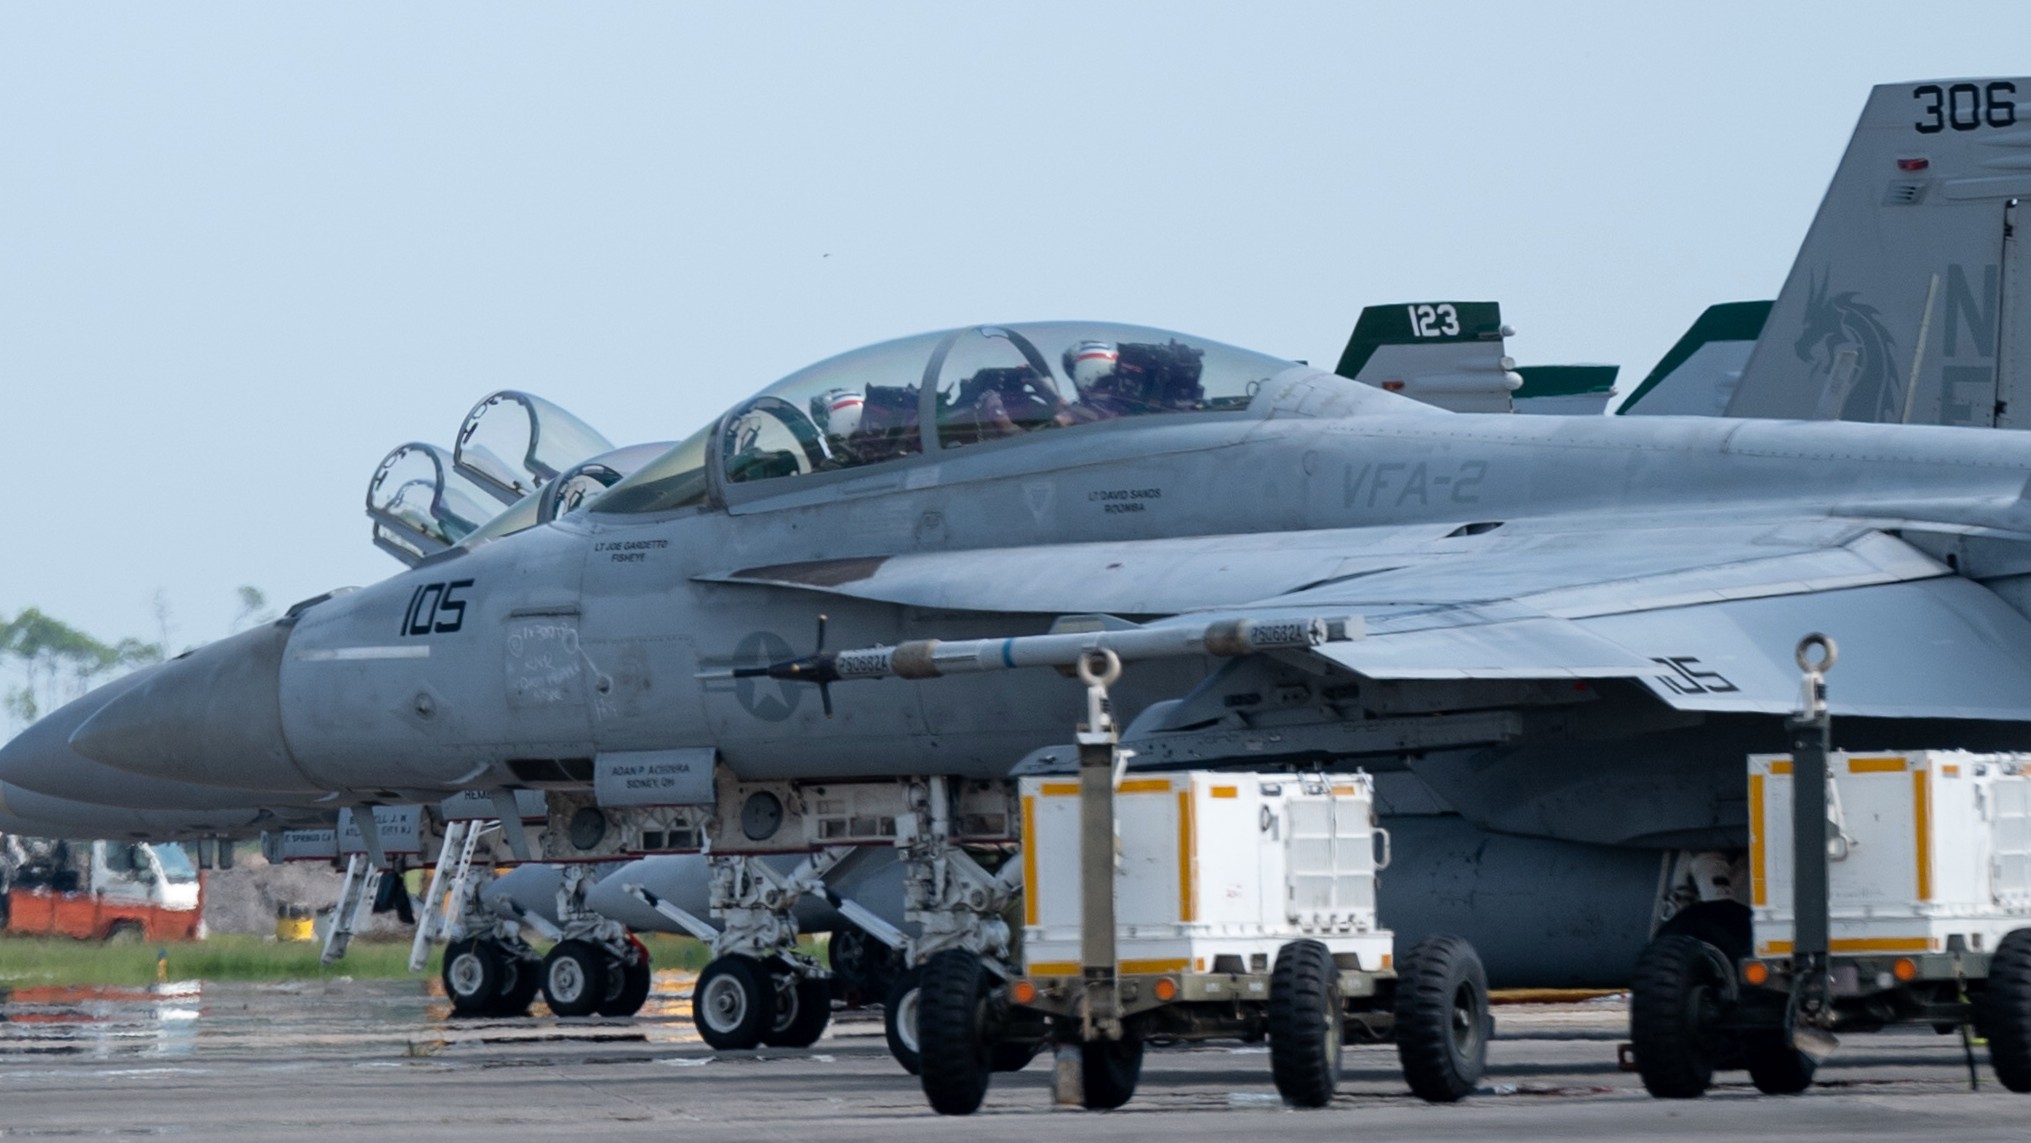 vfa-2 bounty hunters strike fighter squadron us navy f/a-18f super hornet tyndall afb florida wsep east 127